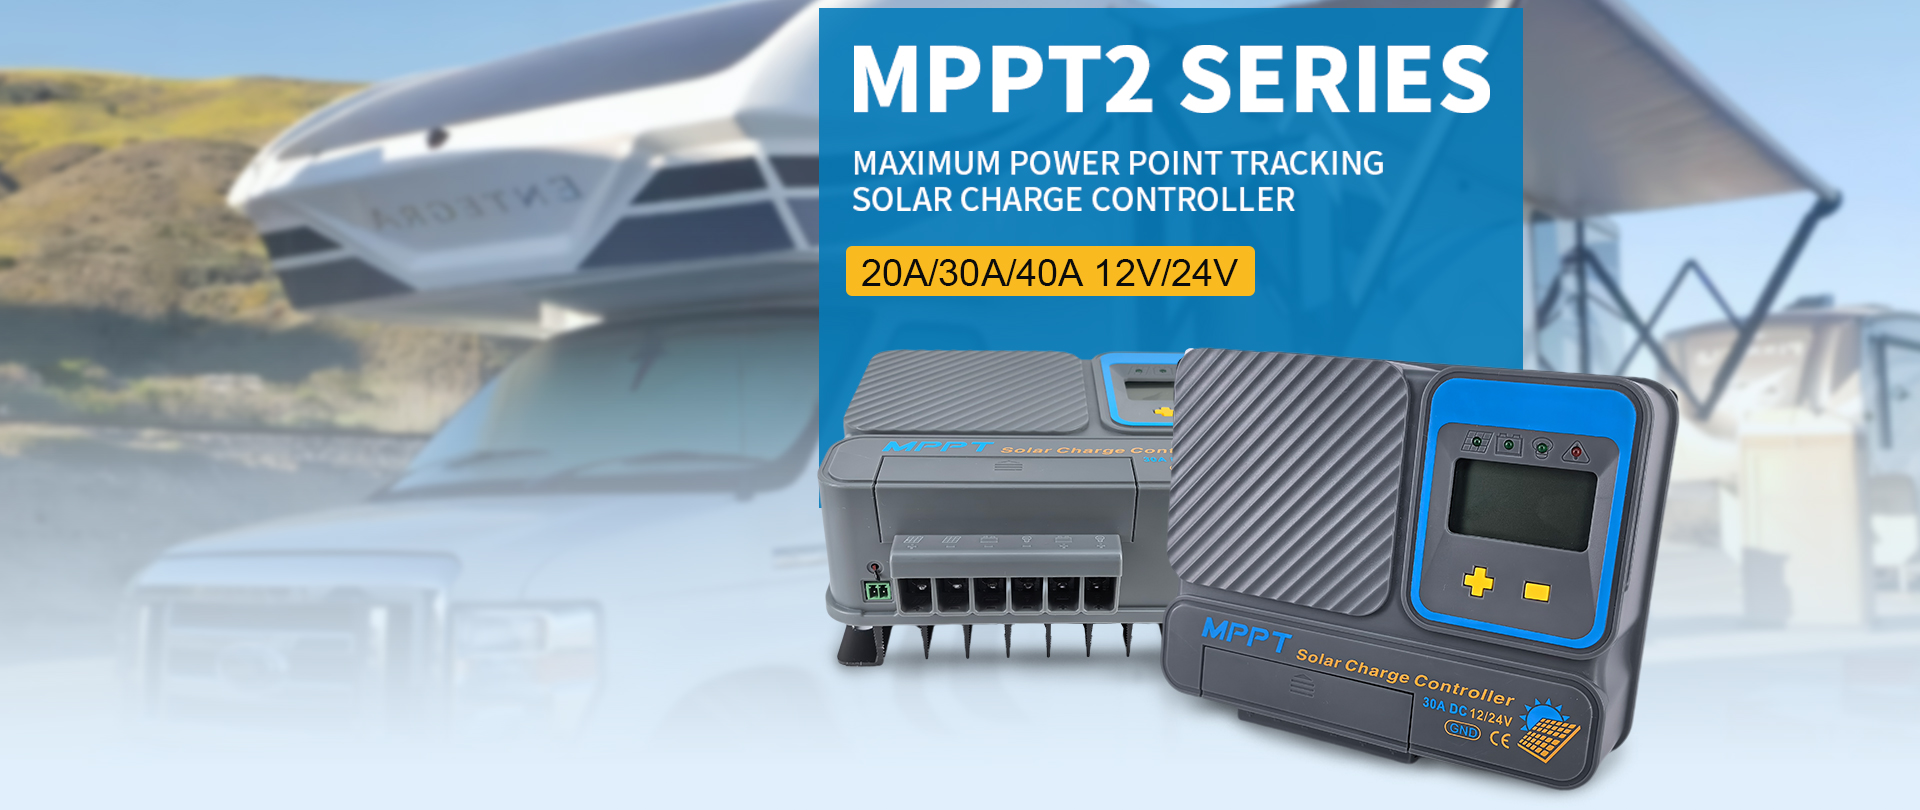 NEW MPPT2 SERIES FOR RV